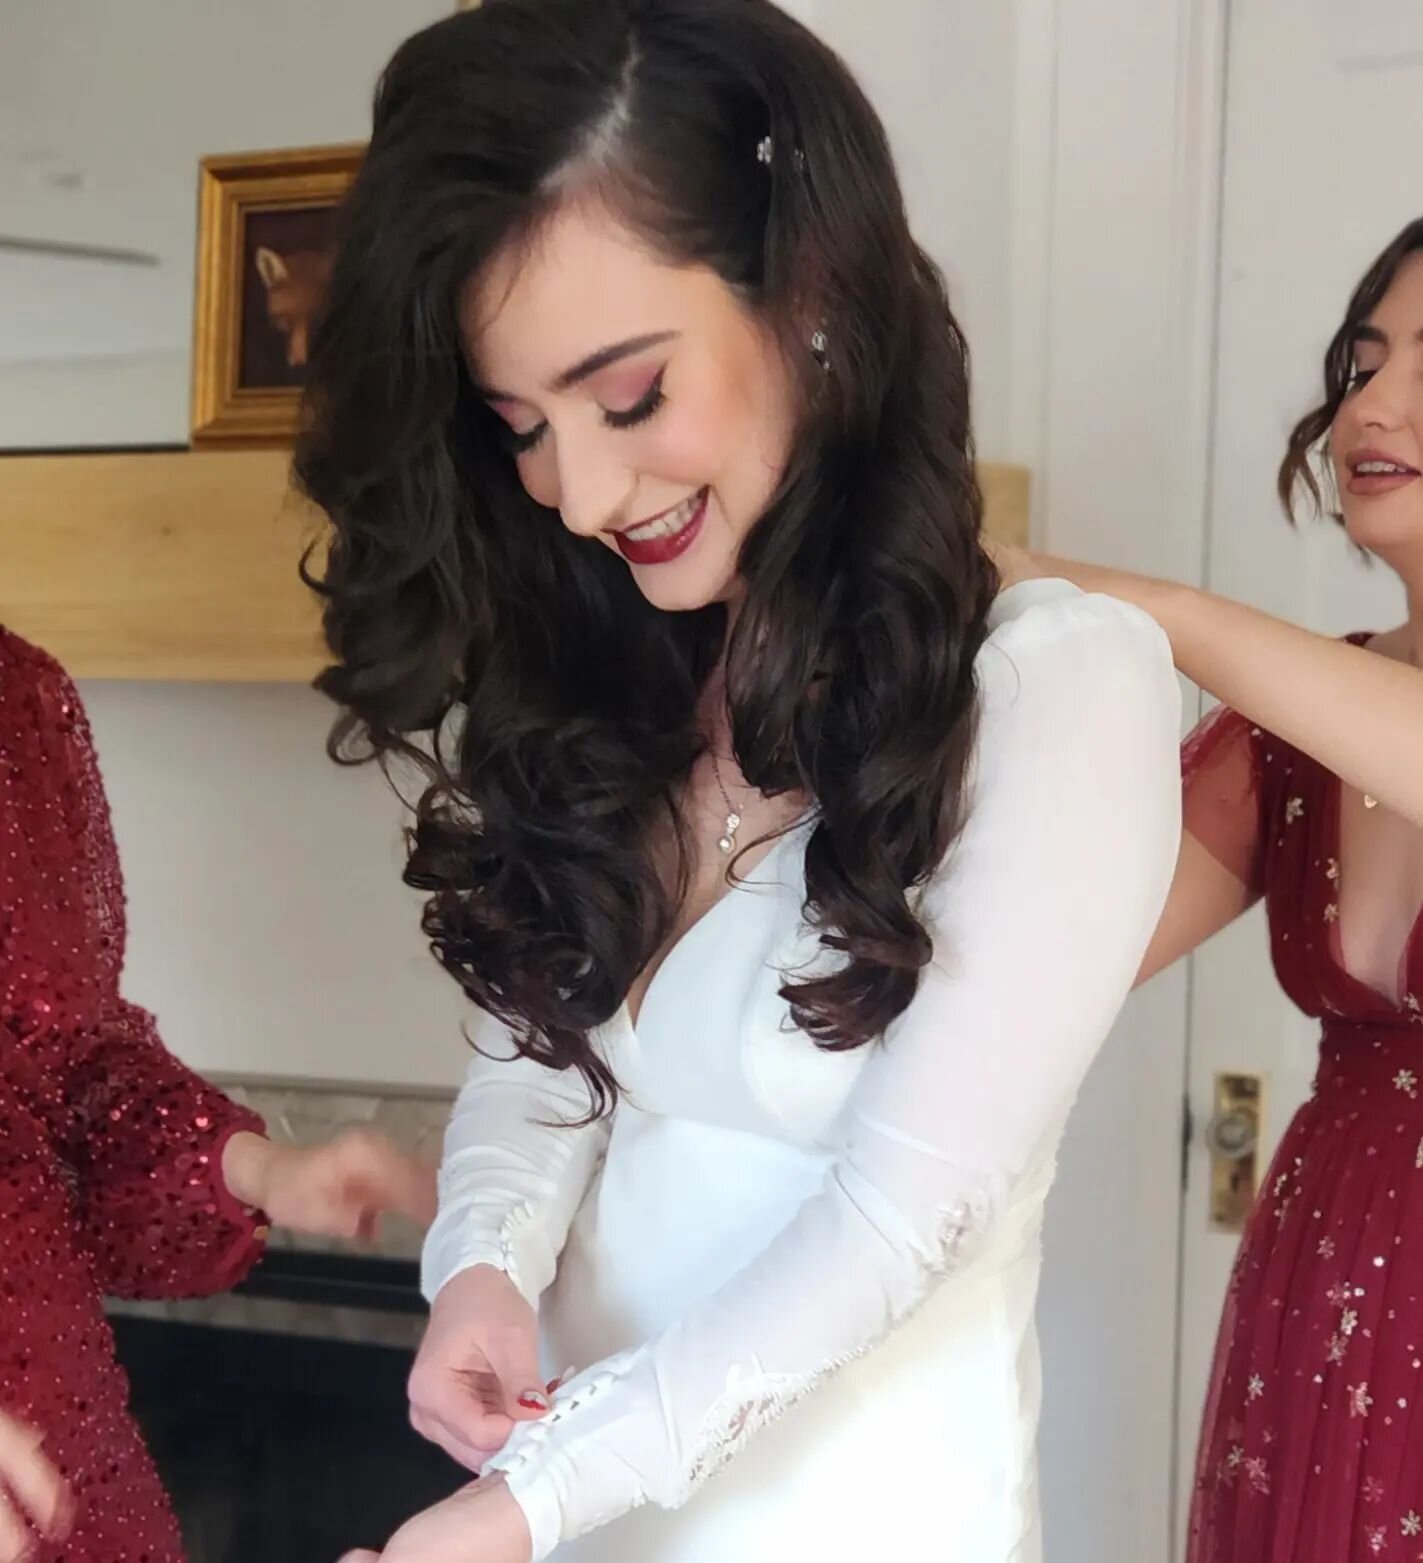 A smile worth a thousand words!!! This bride was GORGEOUS!!!! I had so much creating this glamorous look for her big day! 

💄: @ashley_verdebeauty 
💇&zwj;♀️: @jasmine_verdebeauty